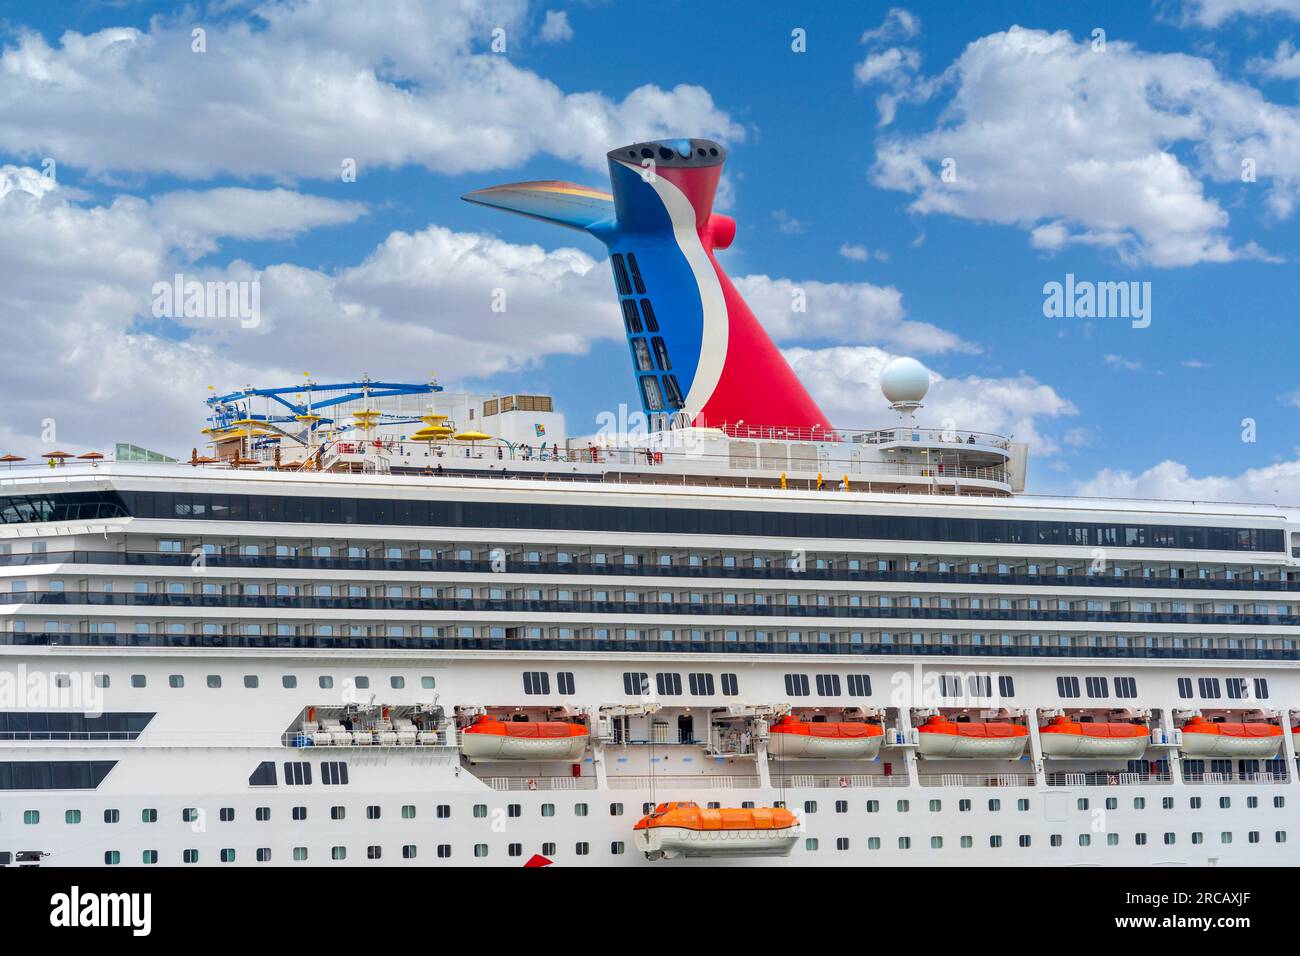 Ensenada, BC, Mexico – June 4, 2023: Carnival Radiance cruise ship with view of the whale tail funnel docked in Ensenada, Mexico. Stock Photo